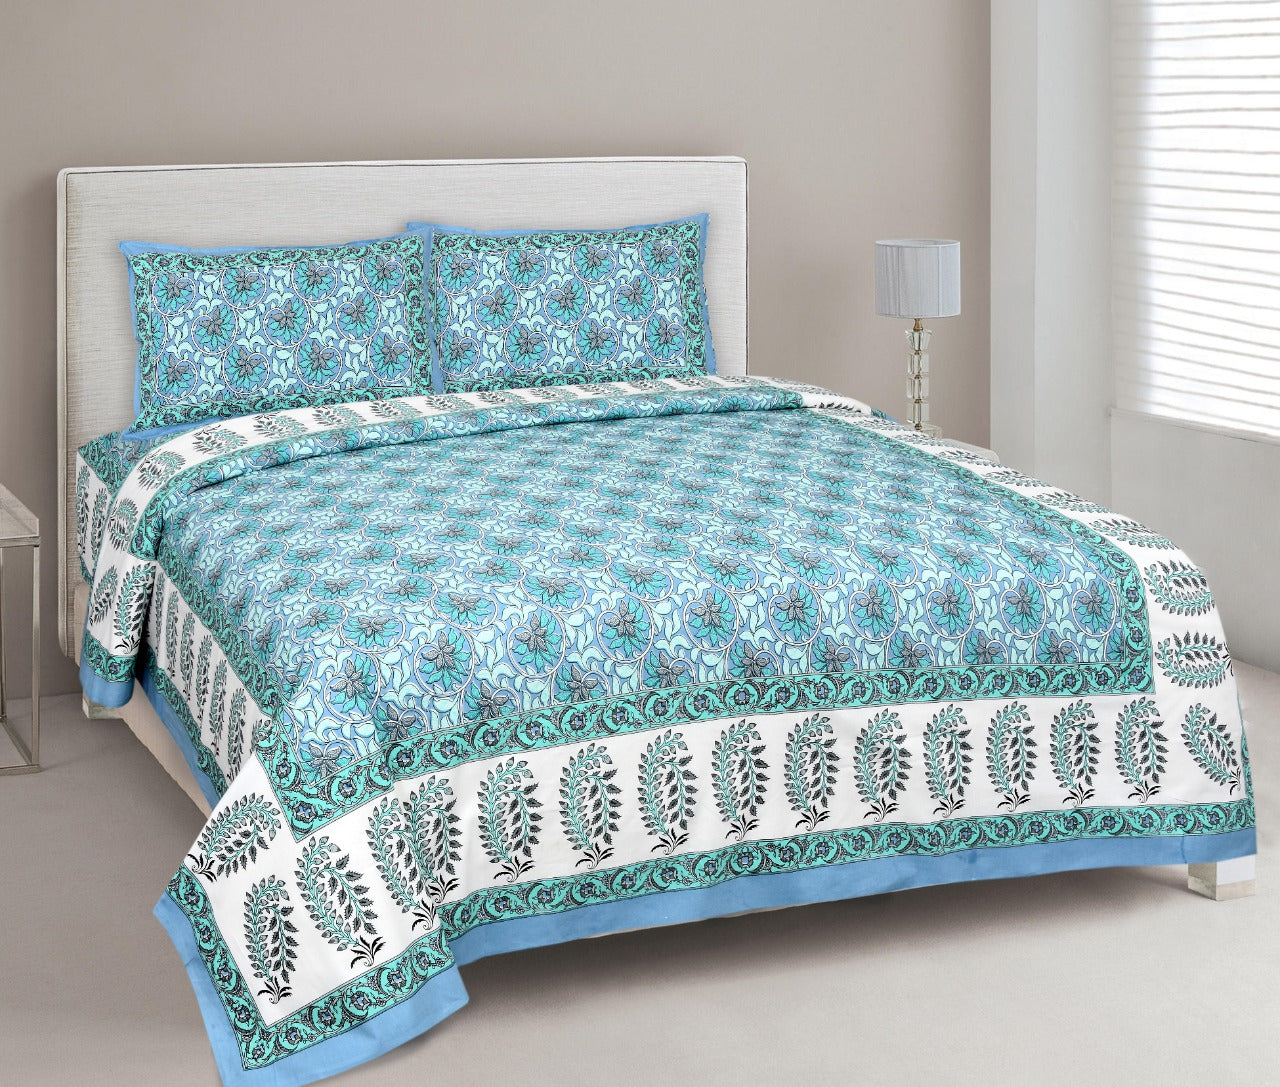 Sky Blue colored Jaipuri Bagru Hand Block Printed Double Bedsheets with stitched pillow cover